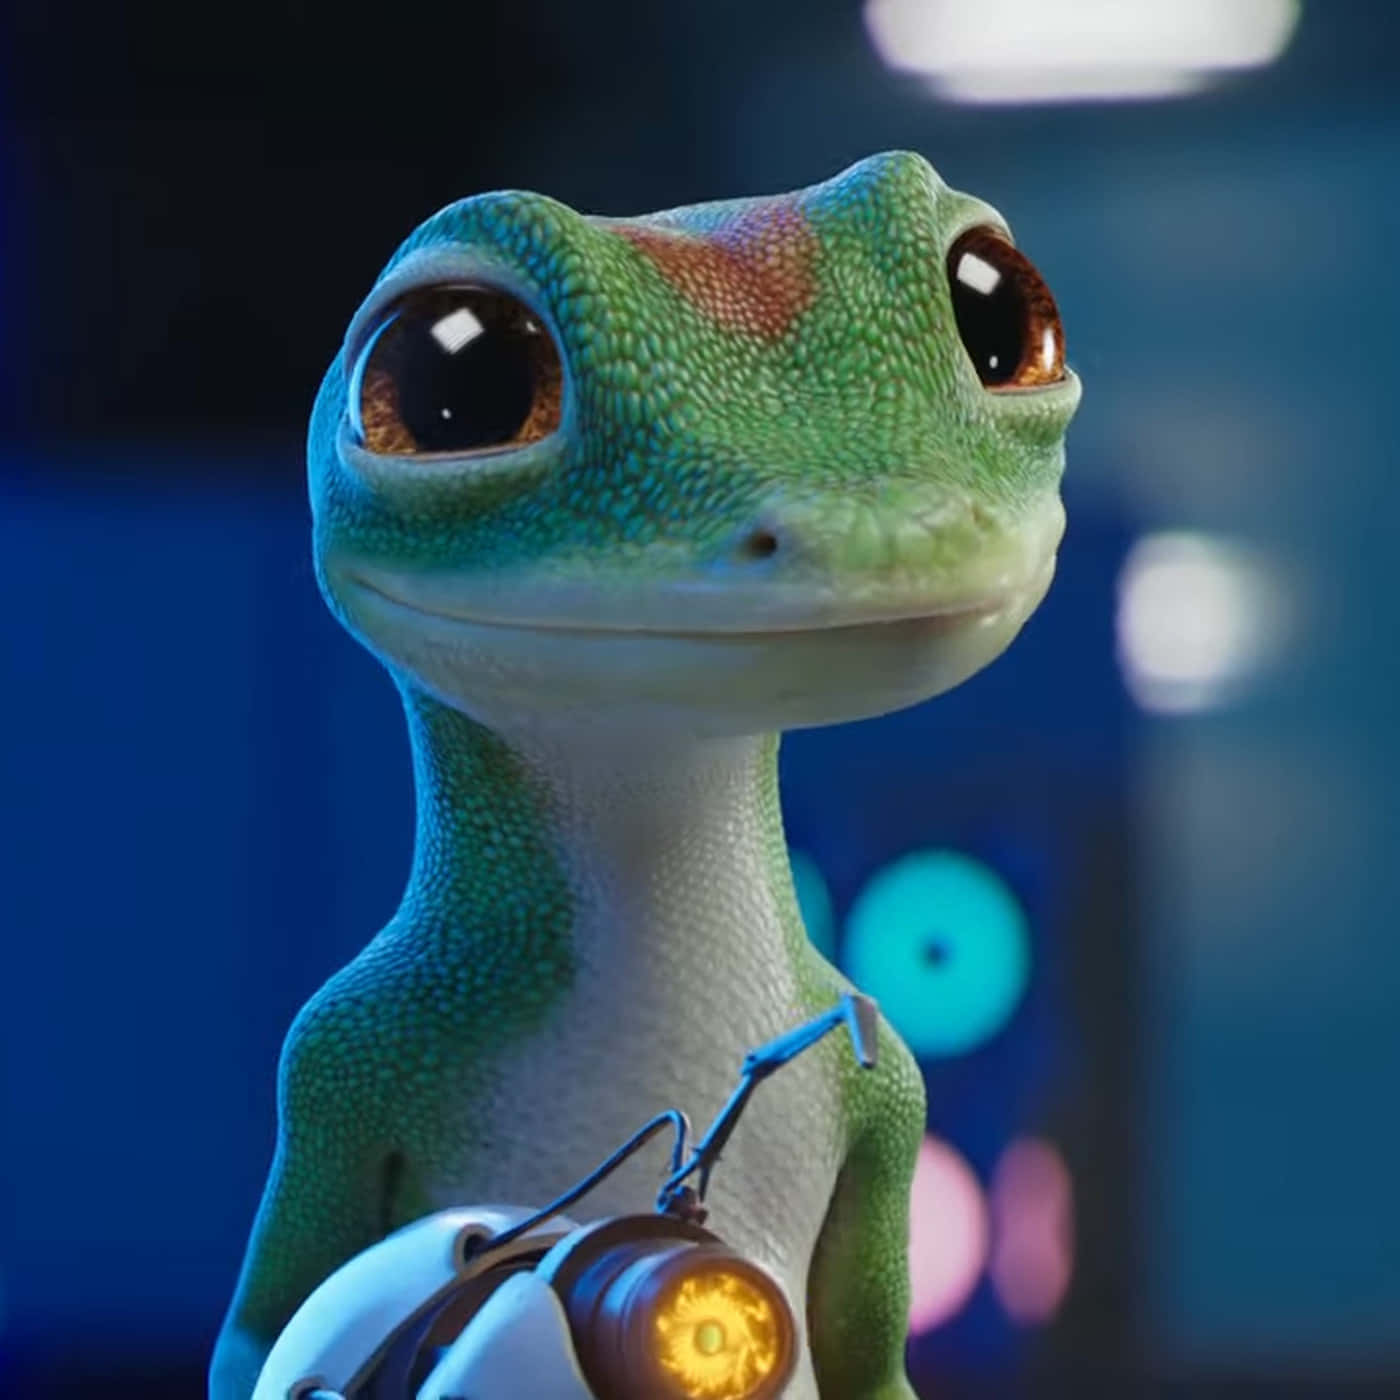 A Gecko With A Robot On His Head